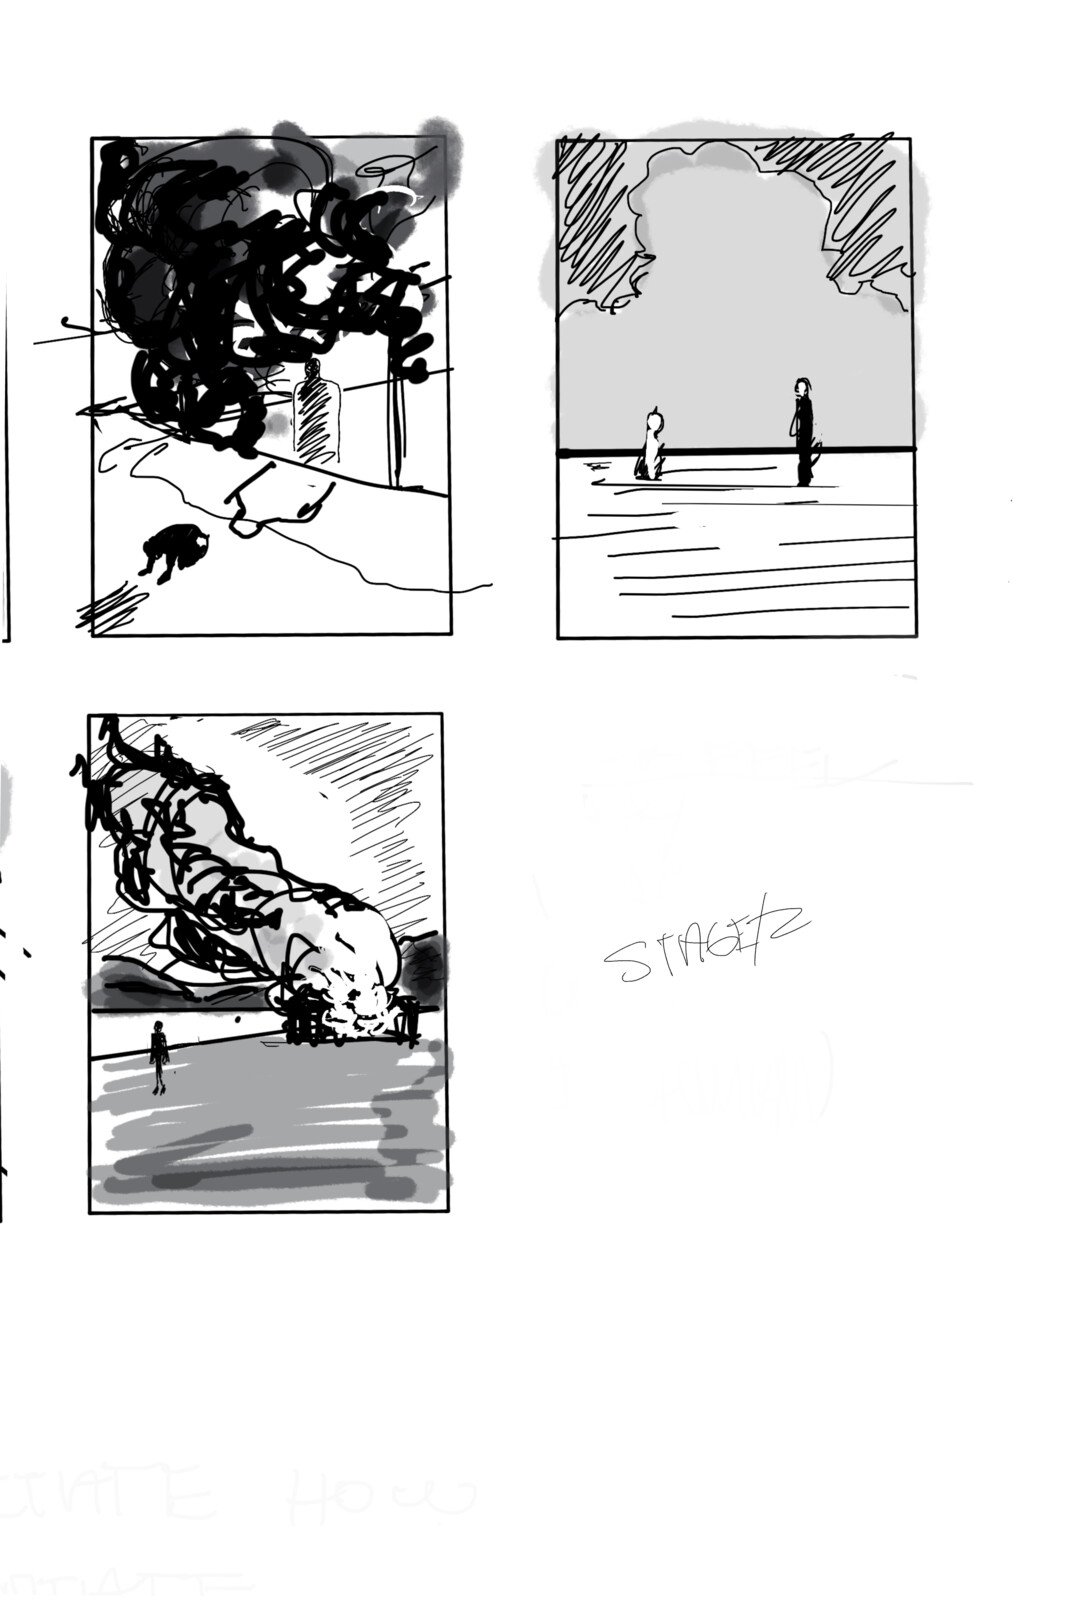 Compositional boards 1/1